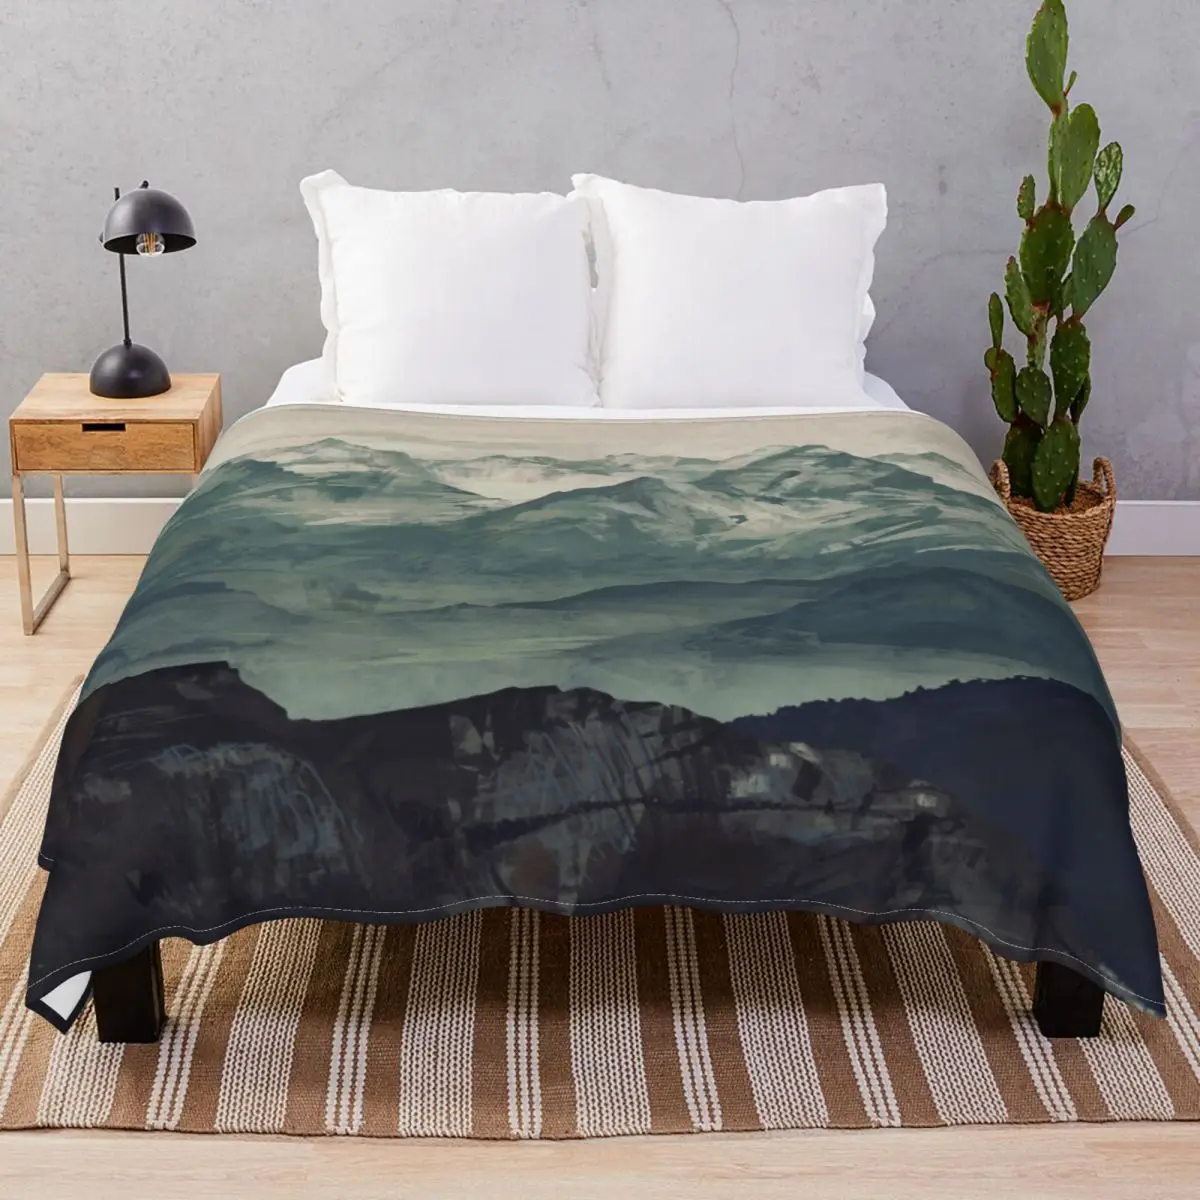 Mountain Fog Blankets Coral Fleece Plush Decoration Breathable Throw Blanket for Bed Home Couch Camp Cinema